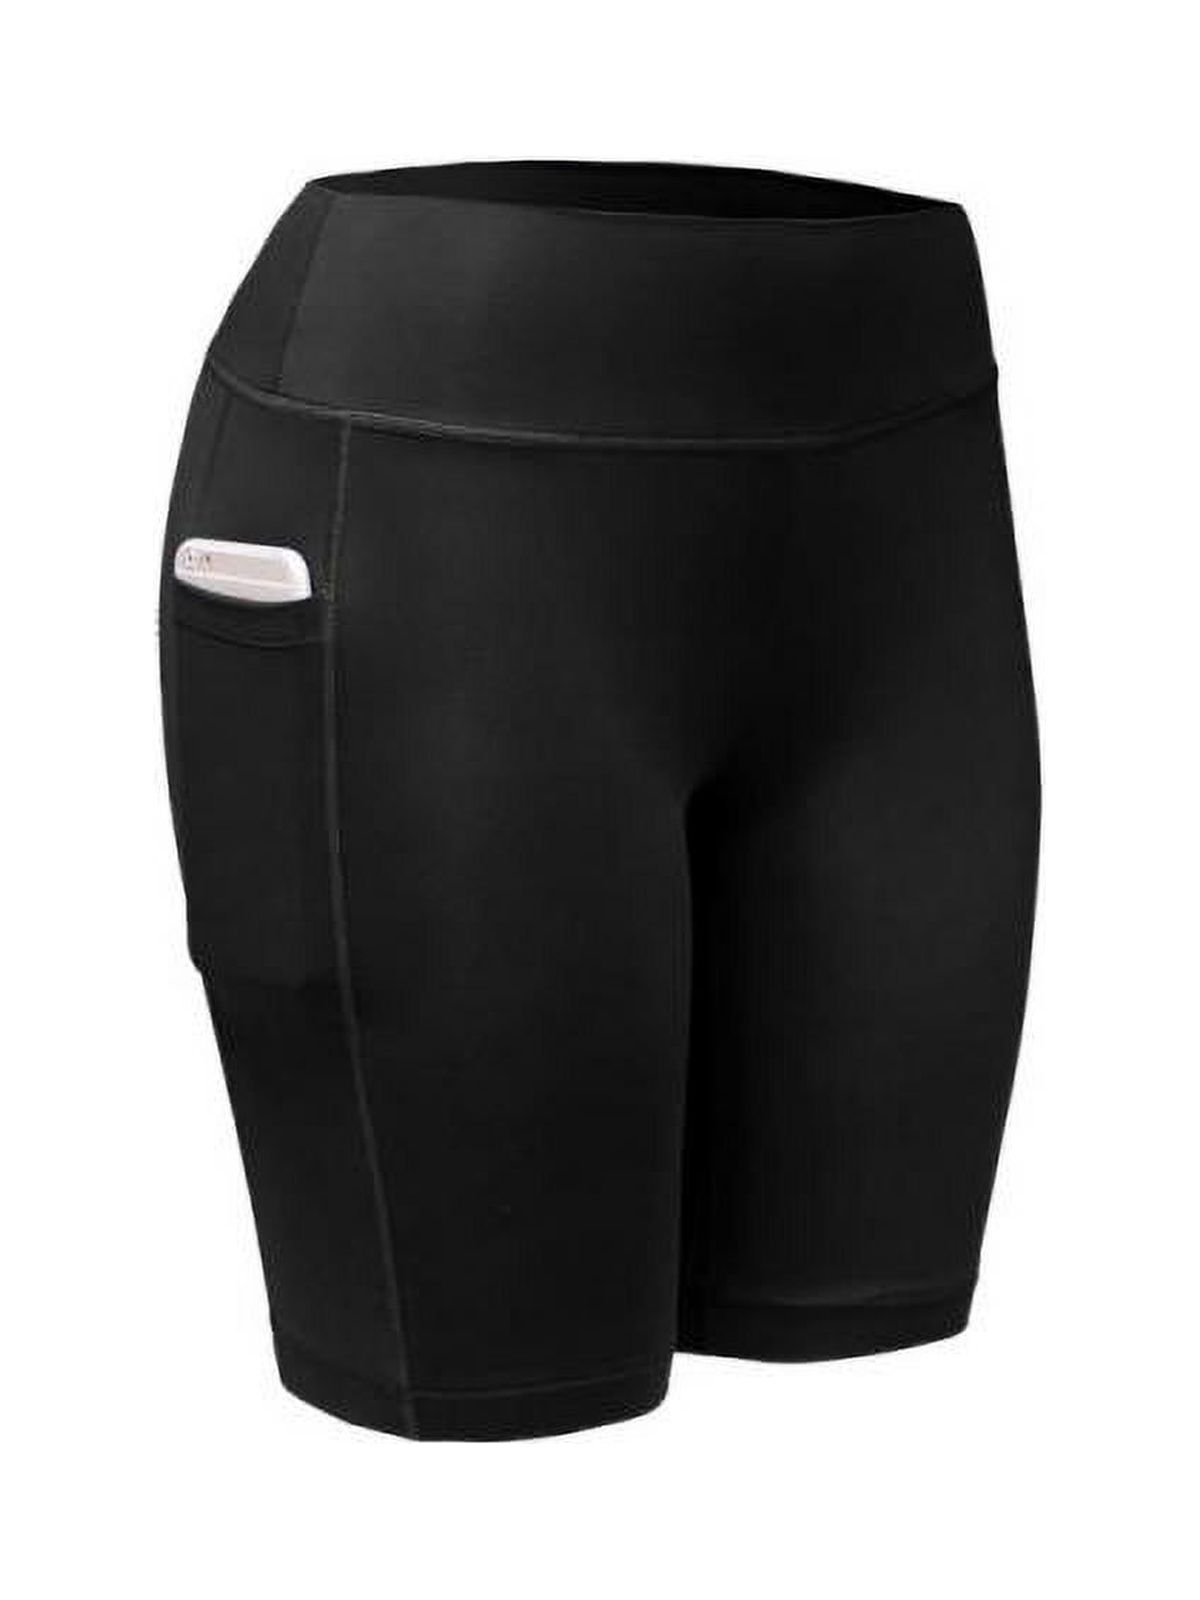 Fymall Women Sports Fitness Compression Shorts For Running Yoga - image 1 of 2